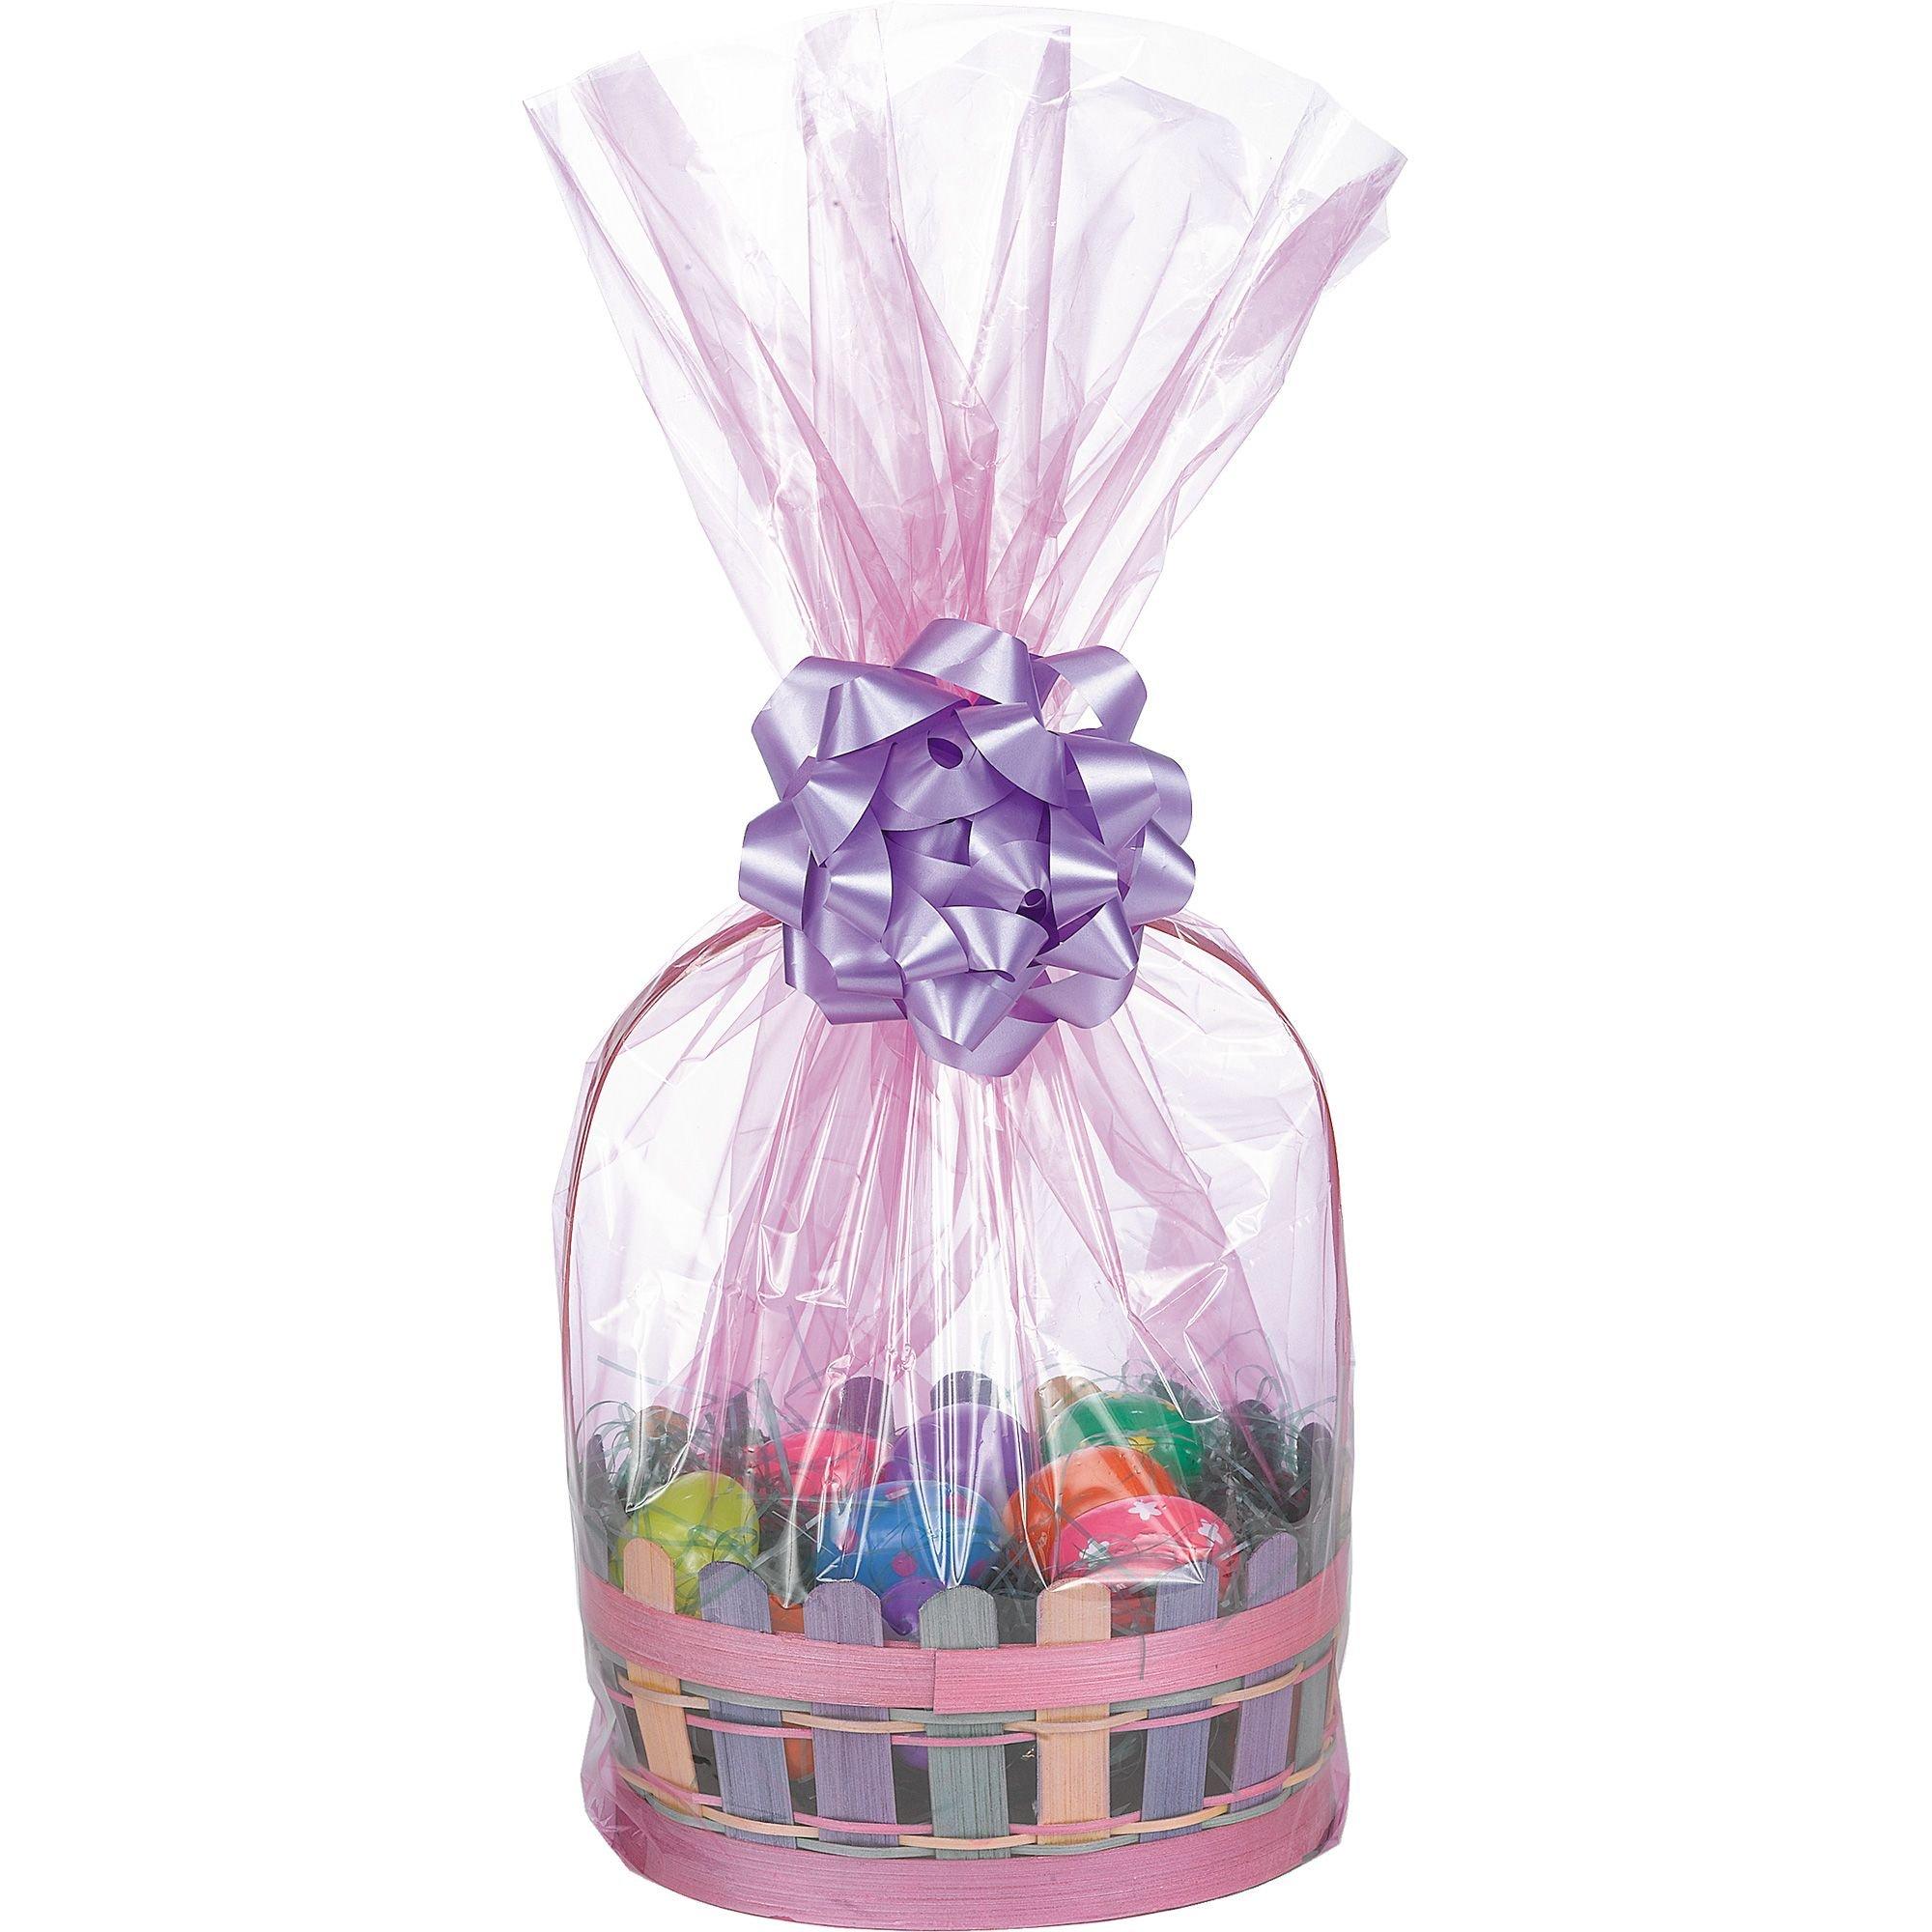  Auihiay Pink Jelly Bag Plastic Gift Basket Girls Jelly